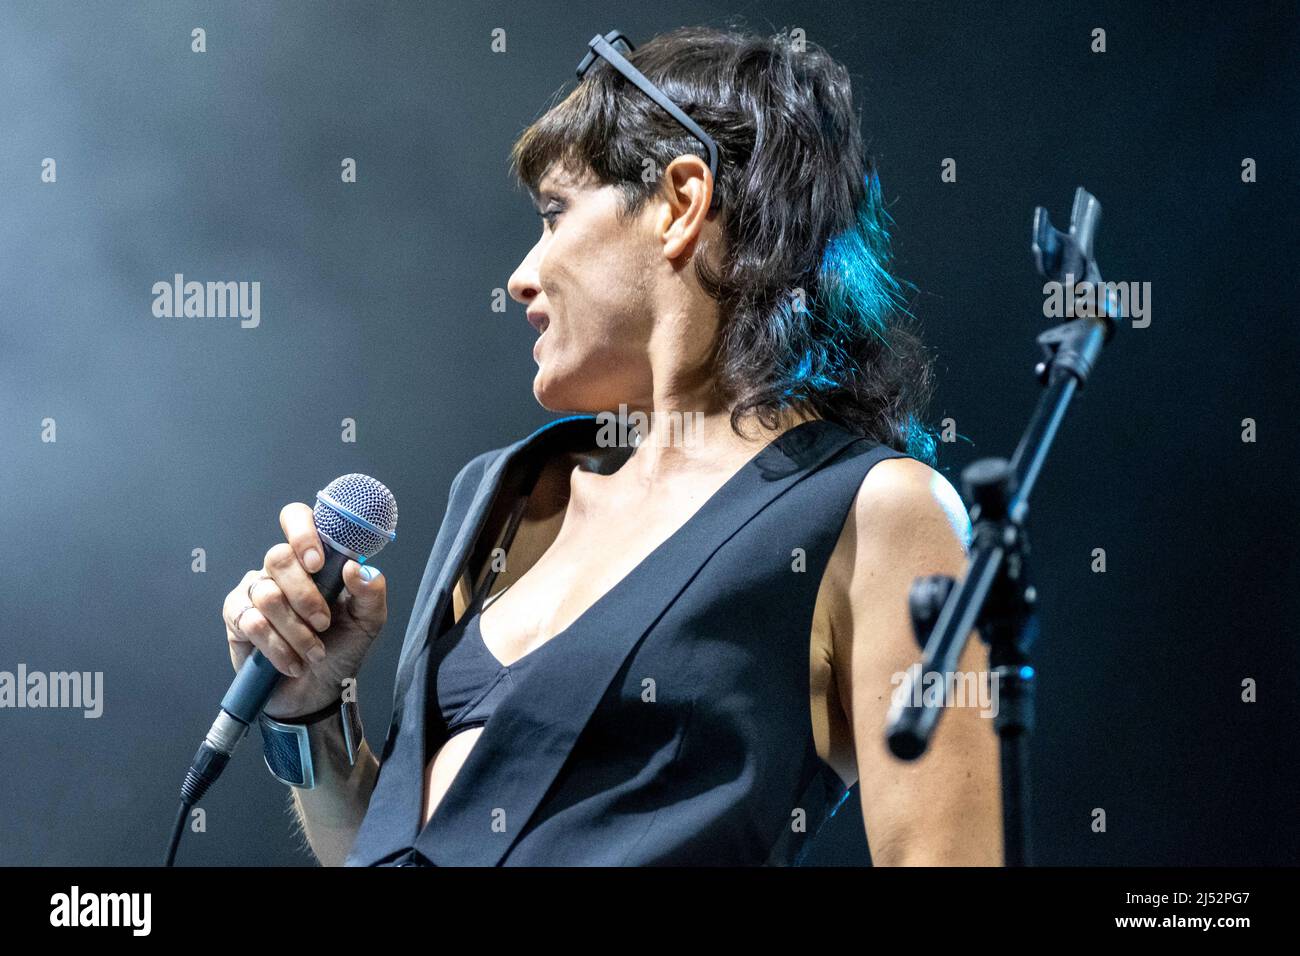 Verona, Italy. 30 June 2021. Picture shows Petra Magoni during the performance at Teatro Romano in Verona for Rumors Festival 2021 Stock Photo